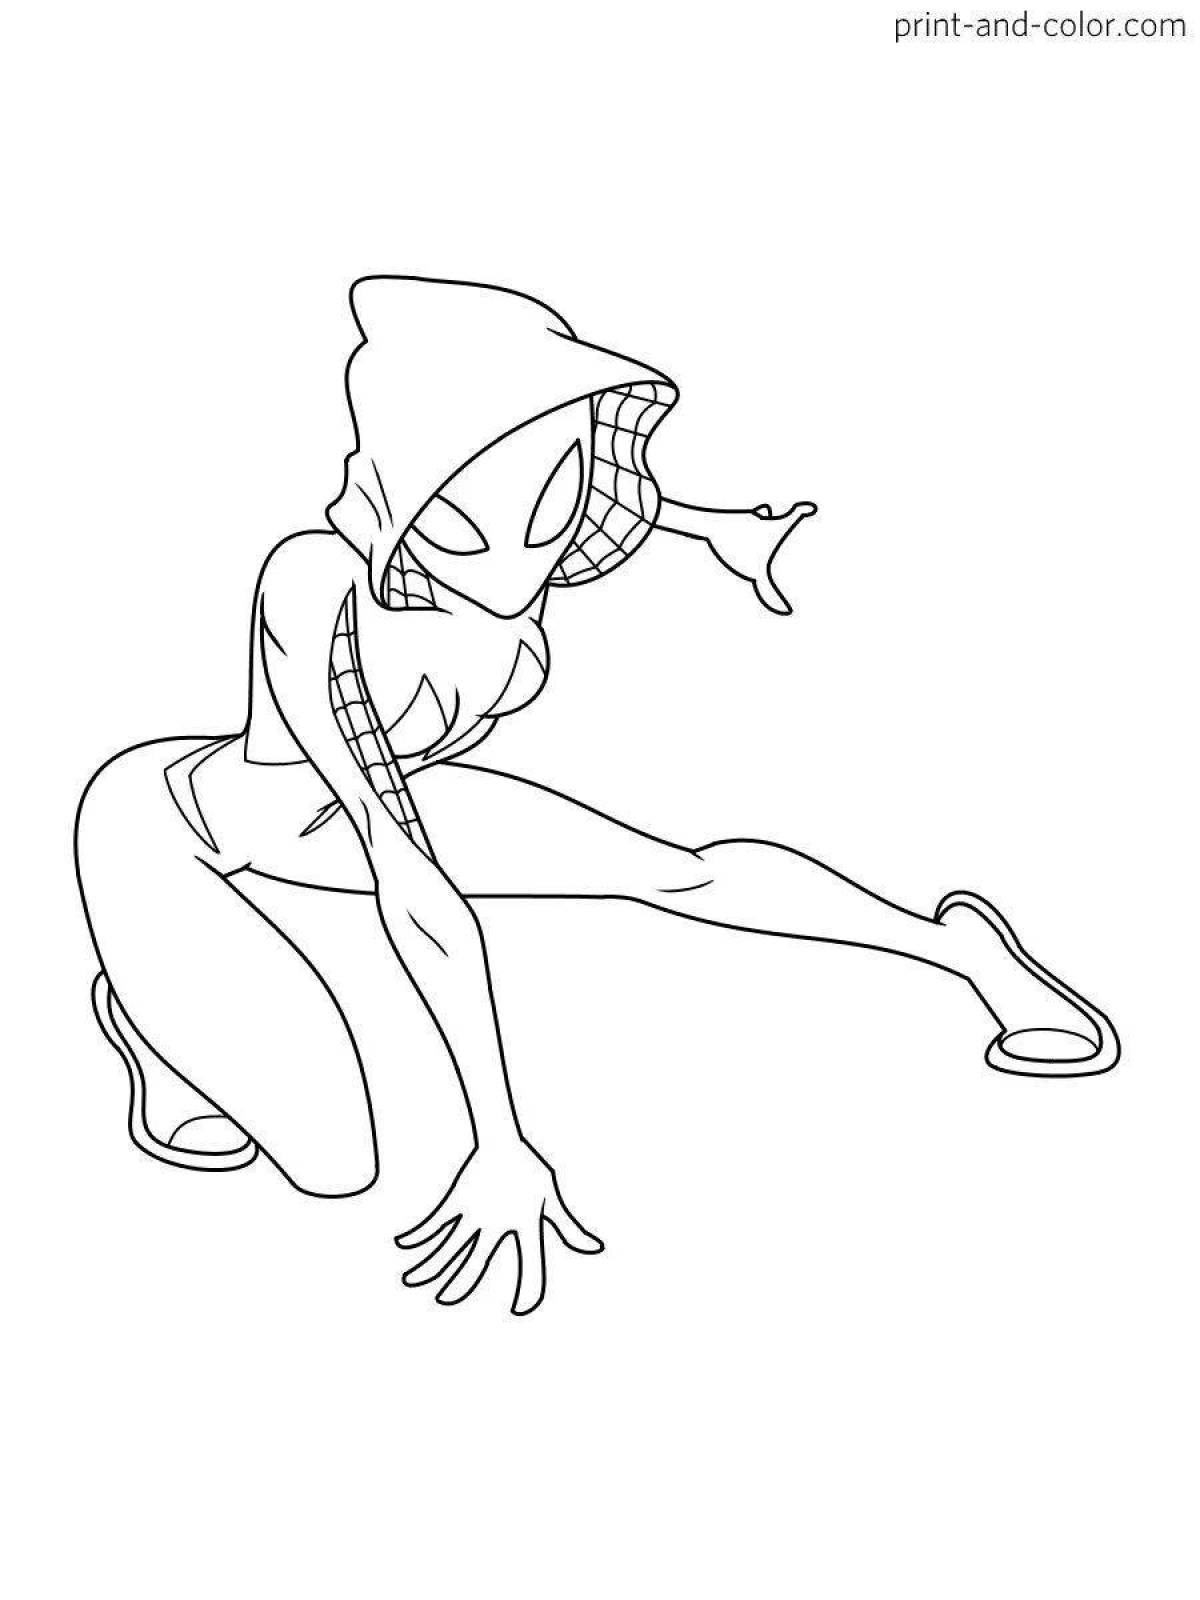 Glowing gwen coloring page